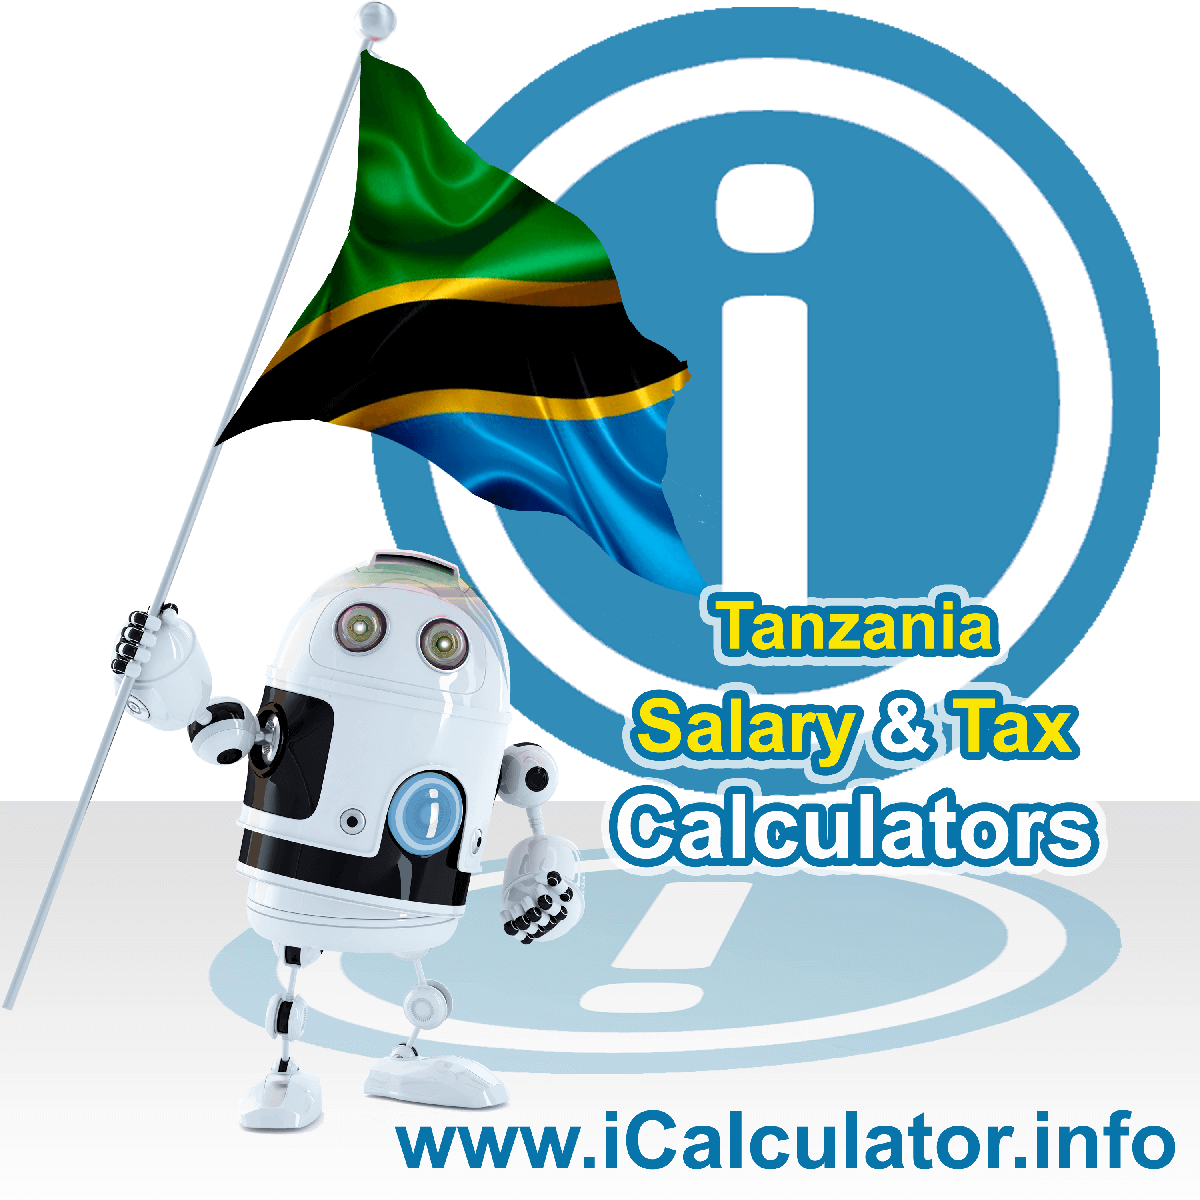 Tanzania Tax Calculator. This image shows the Tanzania flag and information relating to the tax formula for the Tanzania Salary Calculator